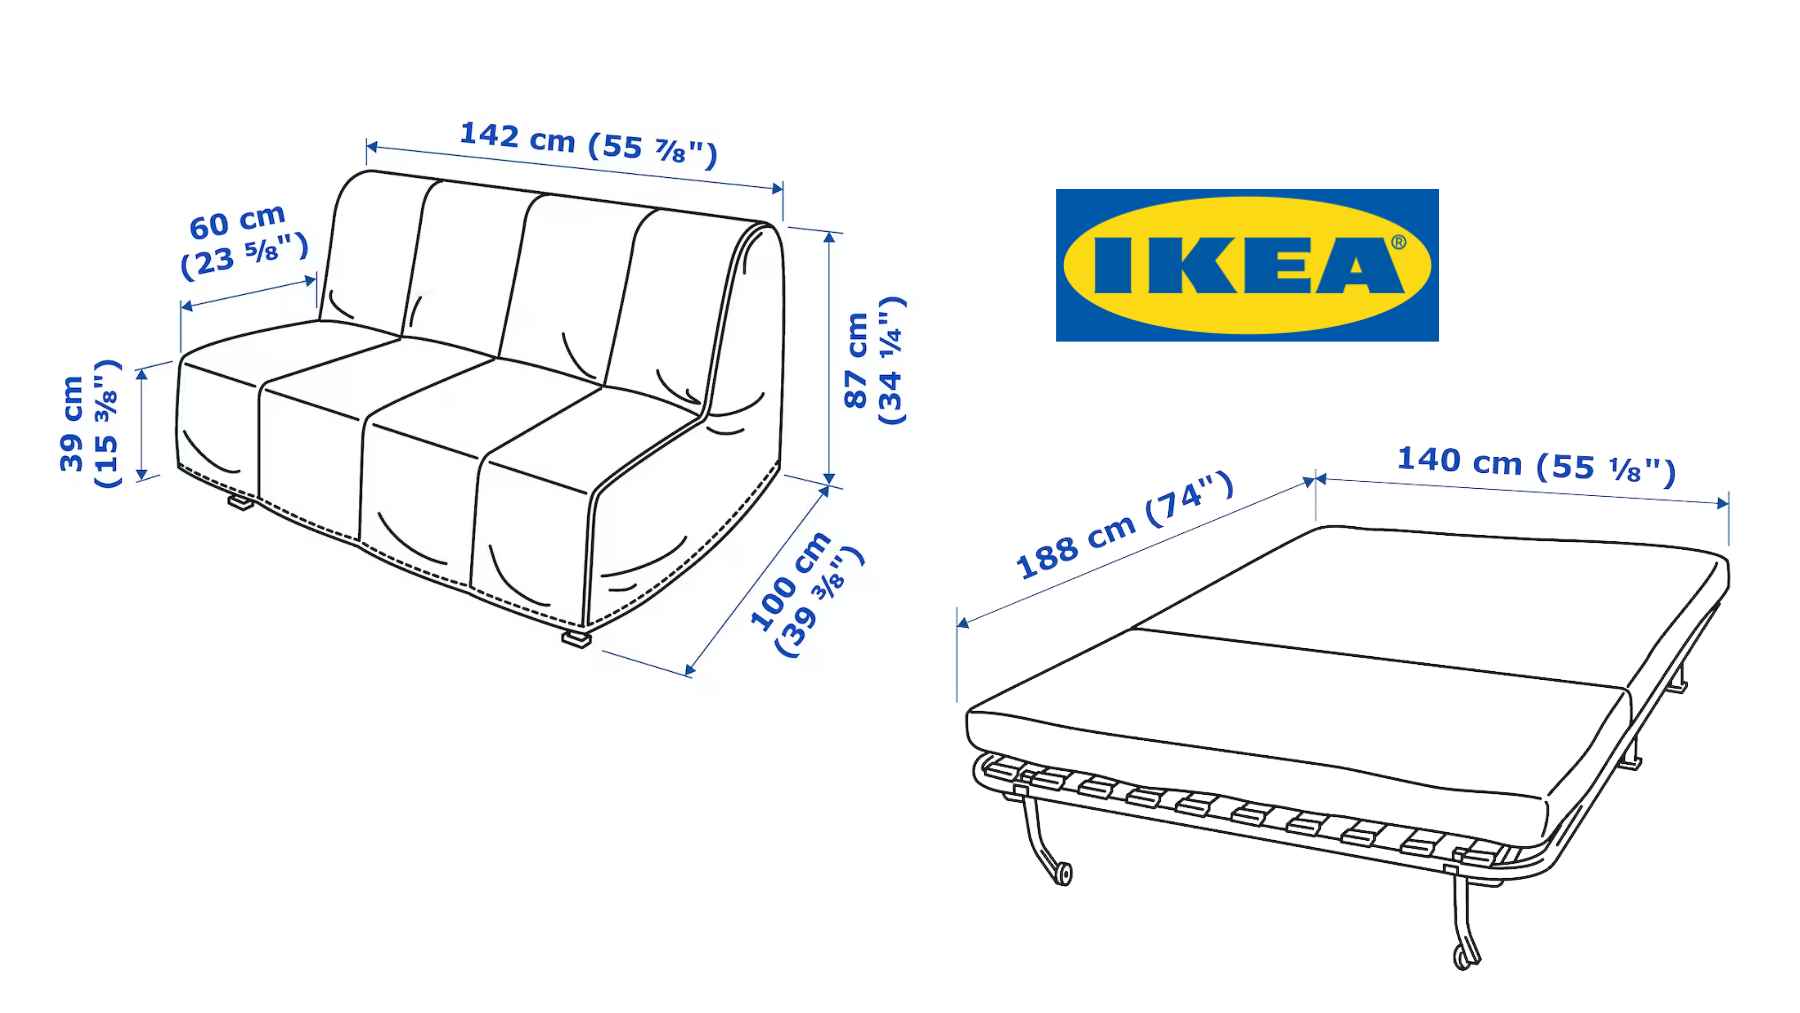 This IKEA sofa ideal spaces instantly turns the room into a guest bedroom